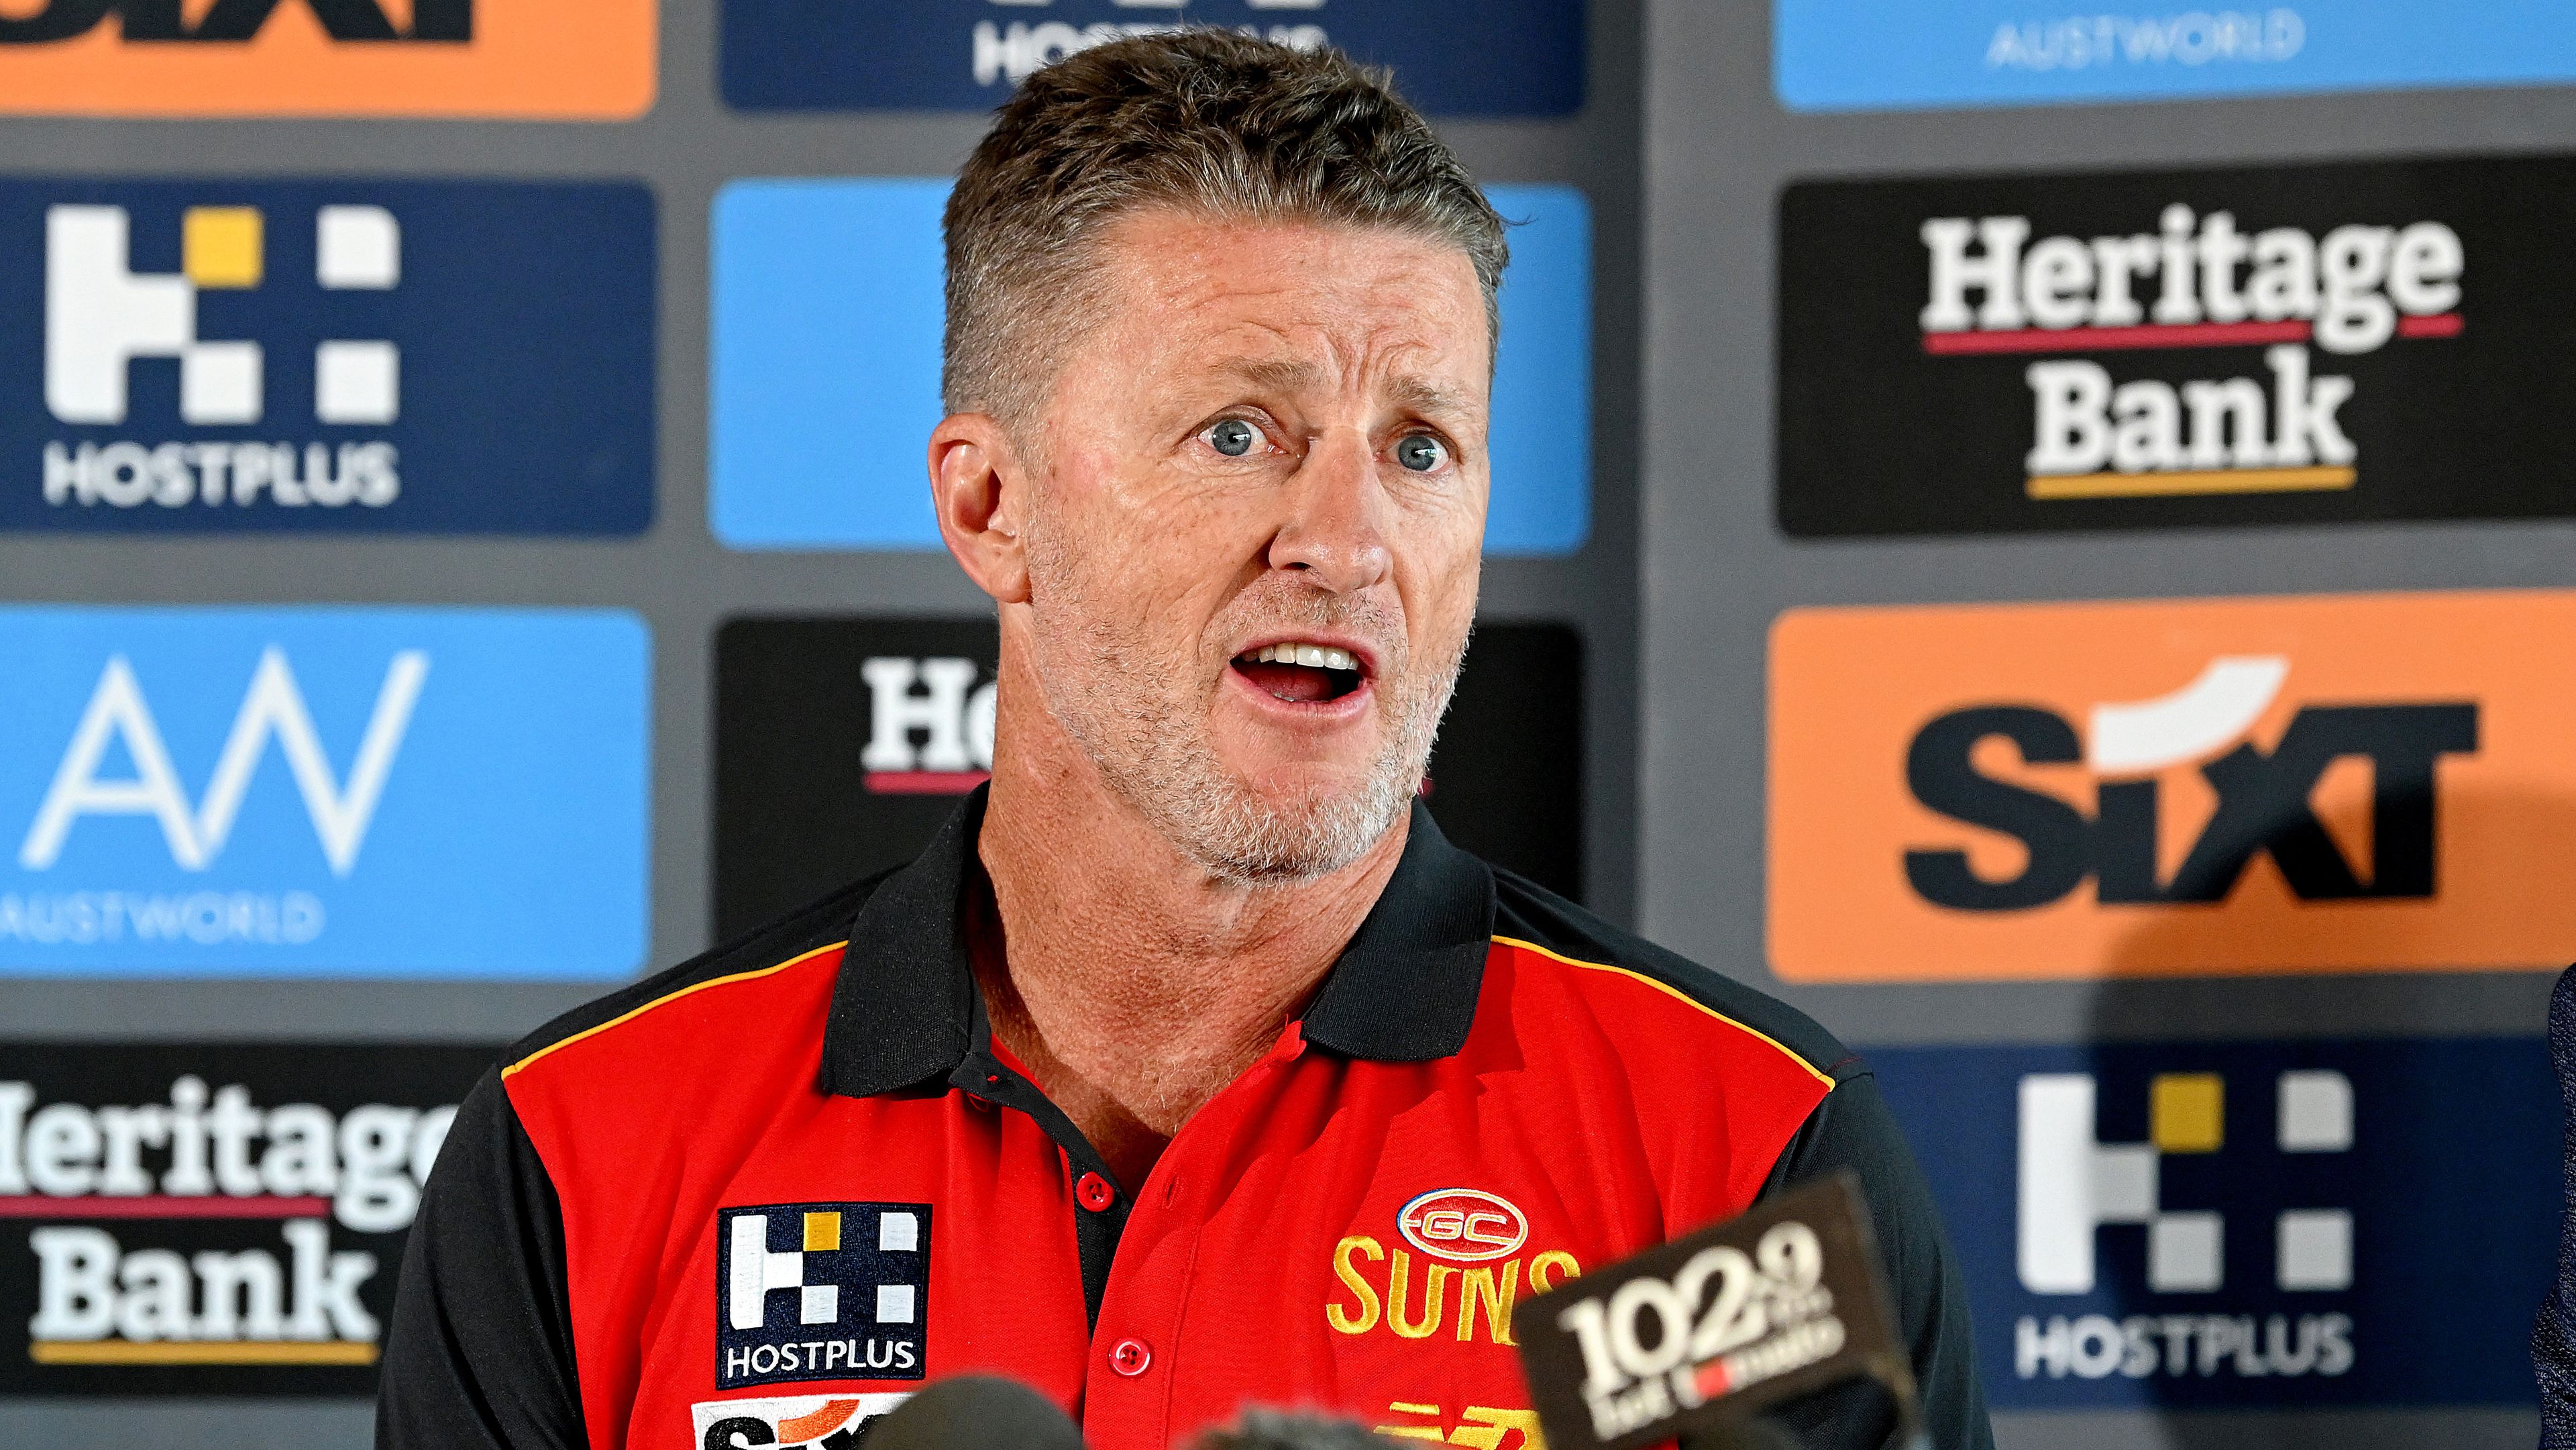 GOLD COAST, AUSTRALIA - AUGUST 21: Damien Hardwick speaks at a Gold Coast Suns AFL press conference announcing his signing as the new coach at Heritage Stadium on August 21, 2023 in Gold Coast, Australia. (Photo by Bradley Kanaris/Getty Images)